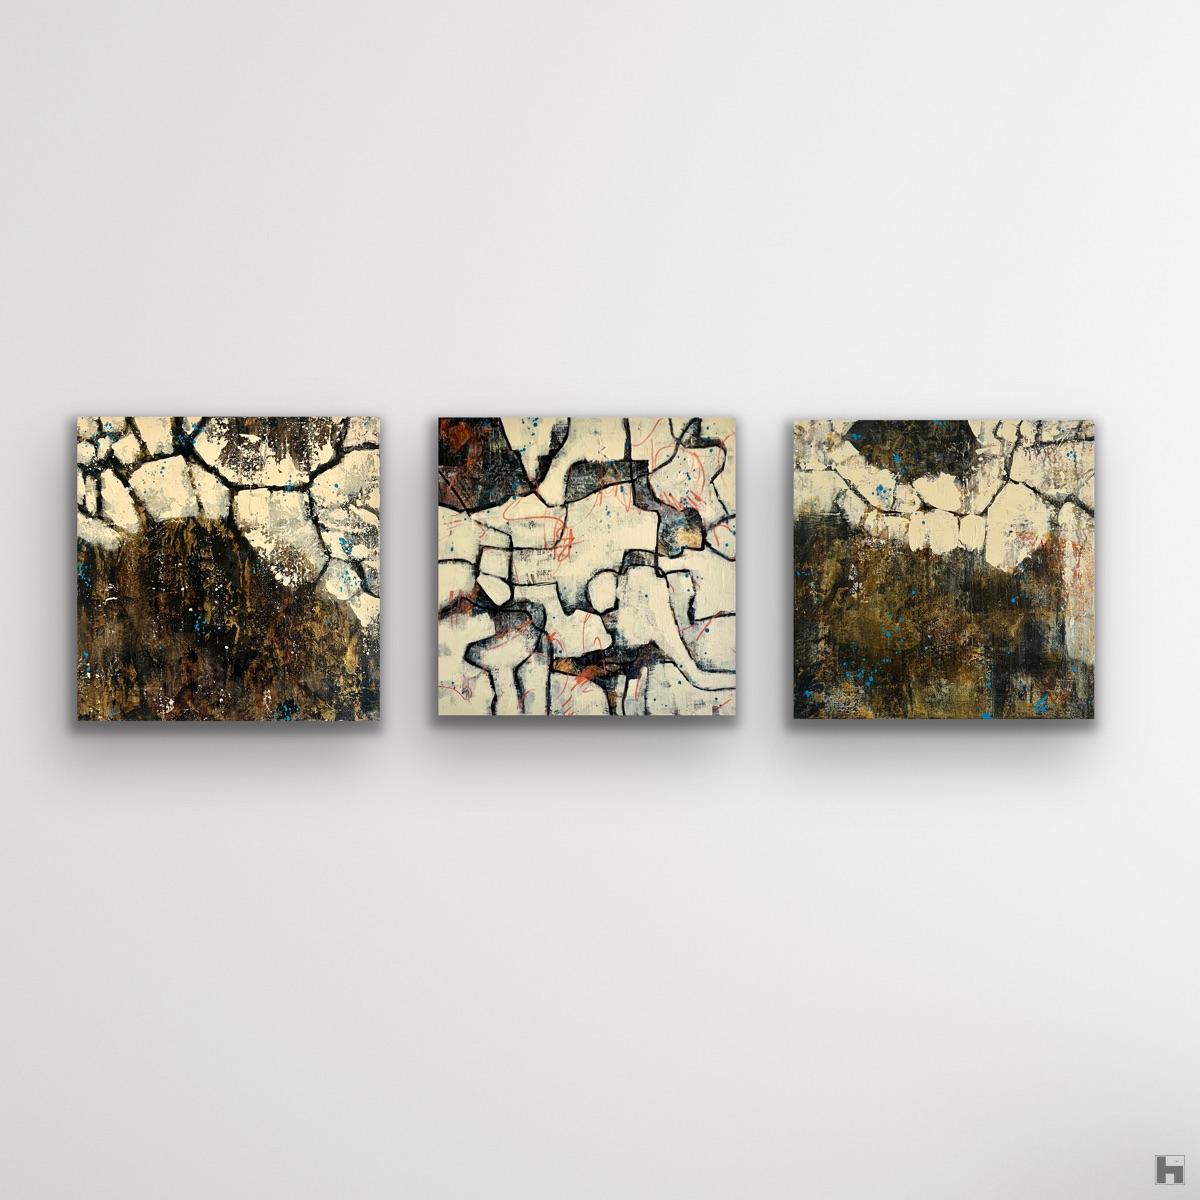 Three small abstract paintings together